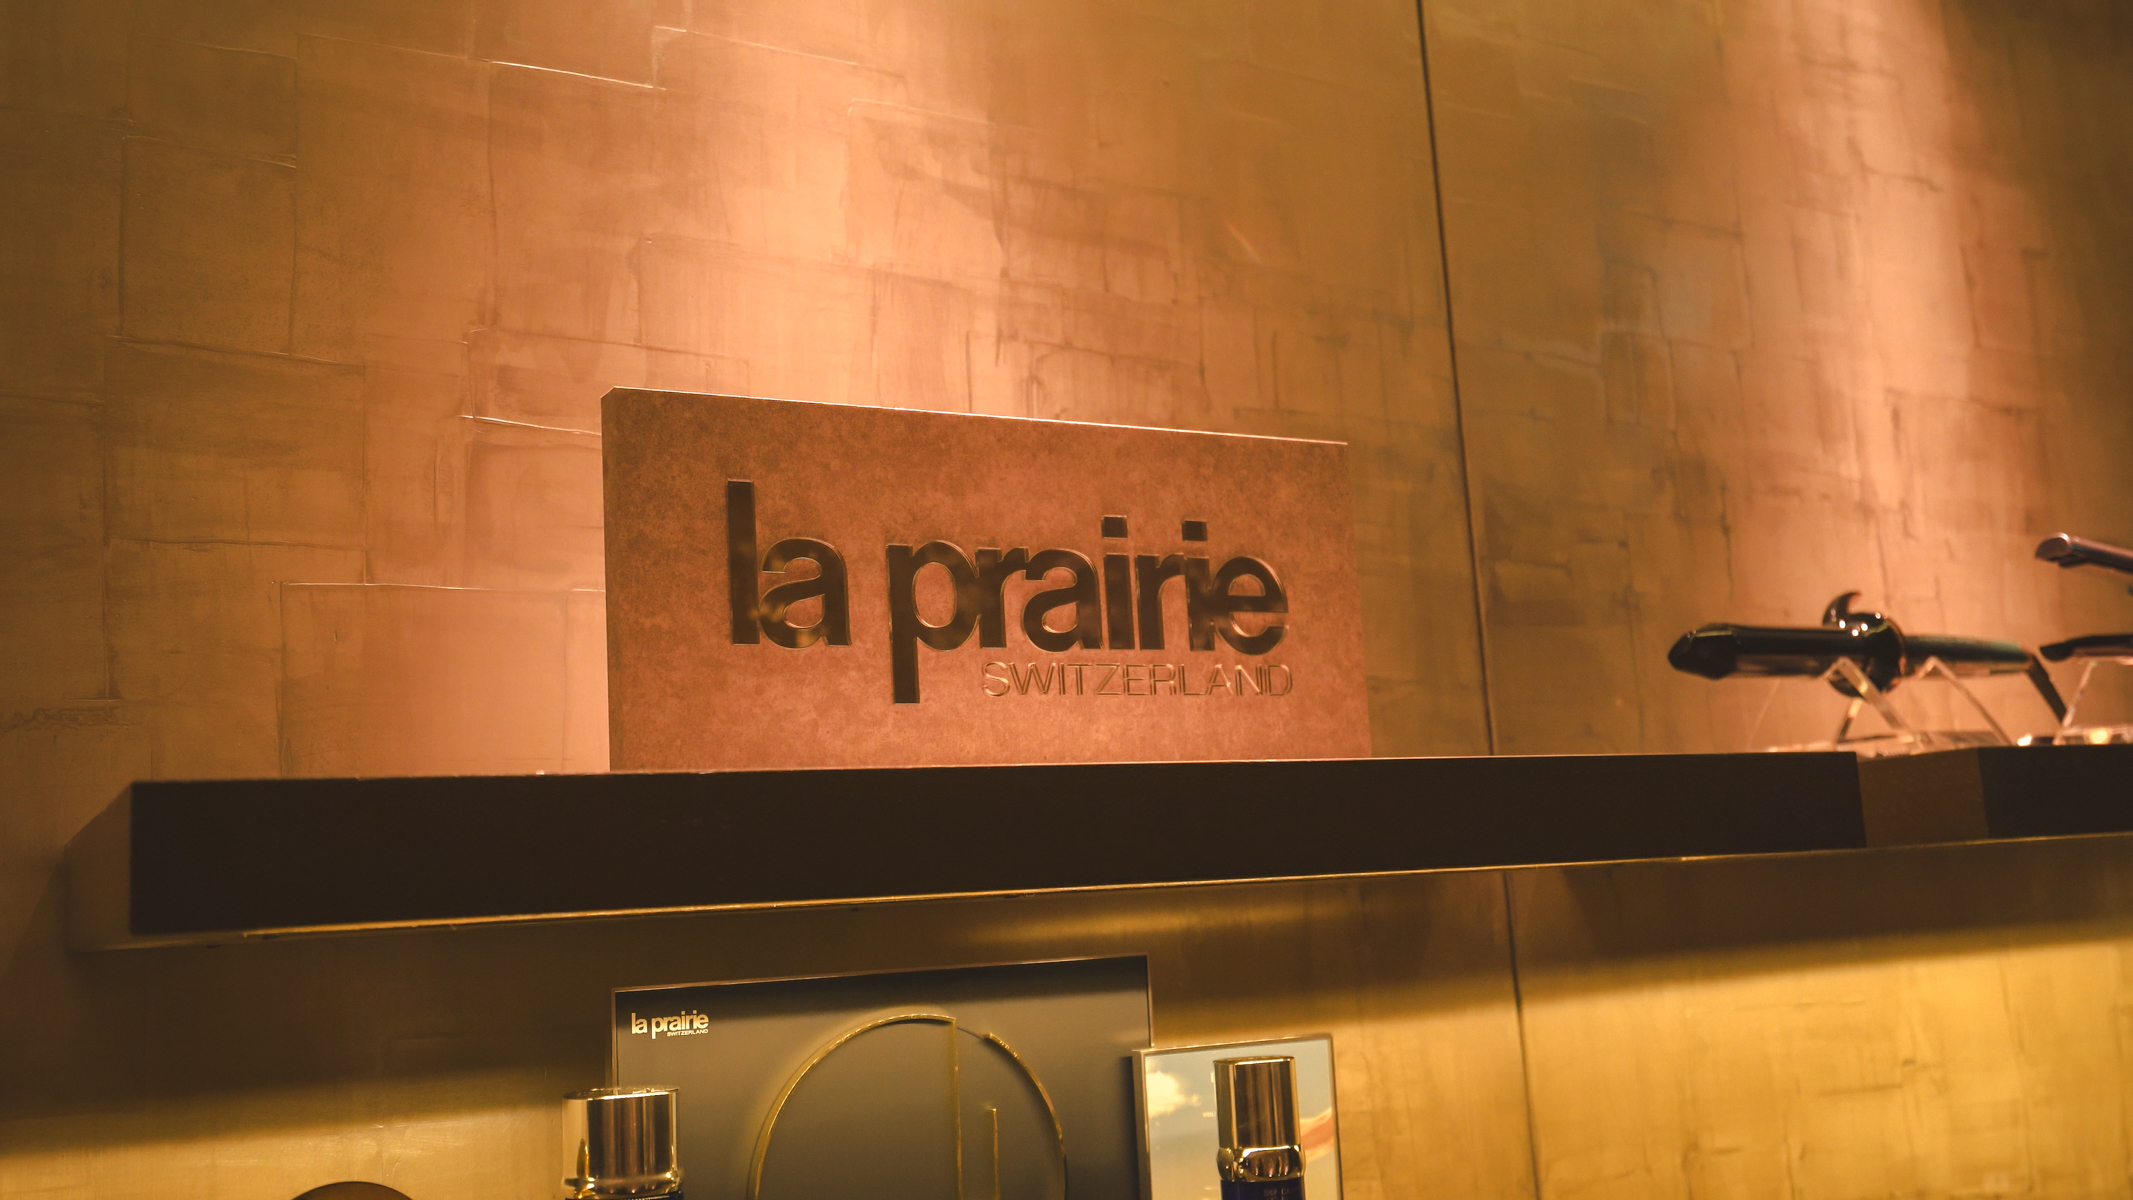 la prairie sign and skincare products for sale on a shelf.